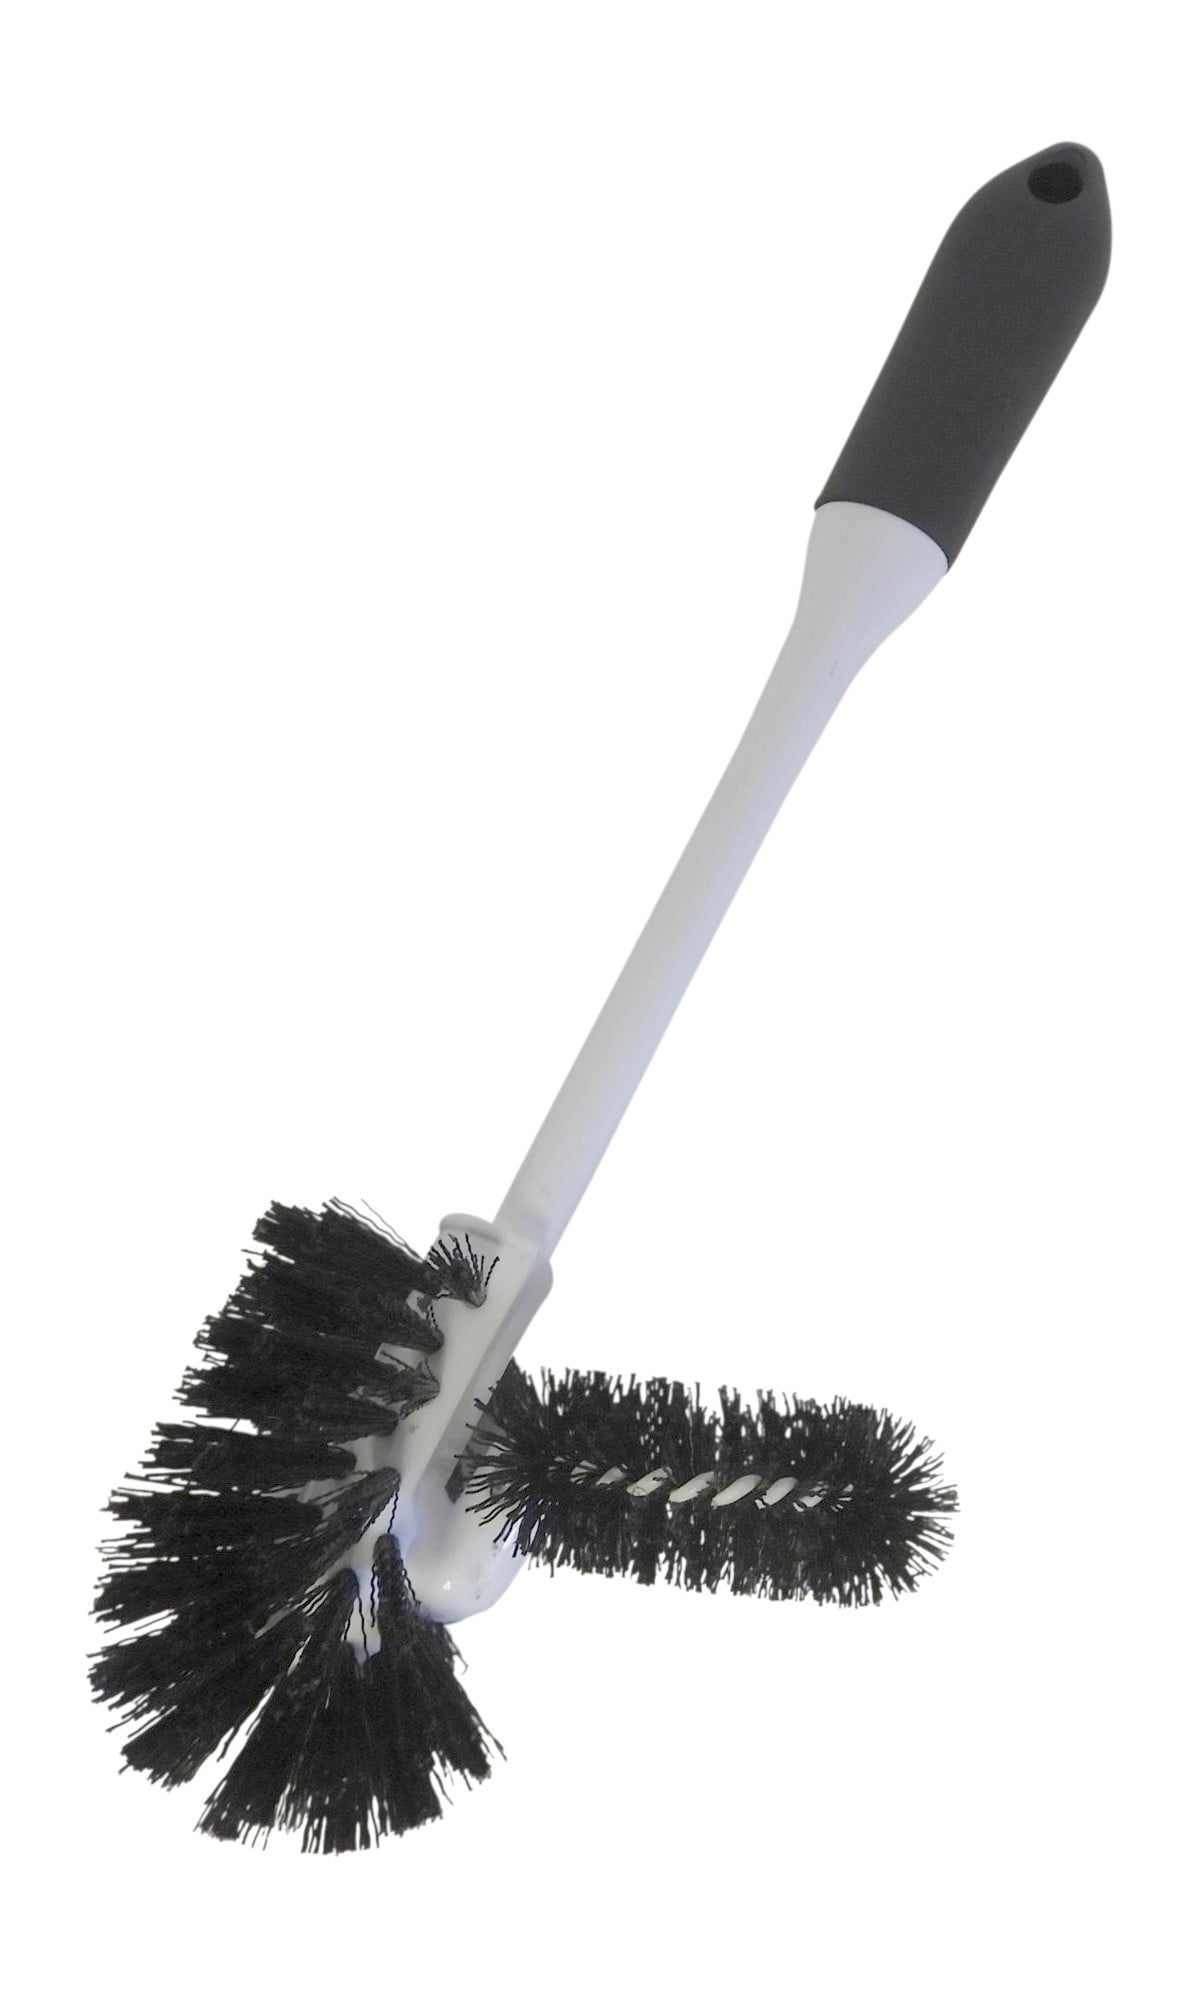 Pine-Sol Toilet Bowl Cleaner Brush with Holder | Heavy Duty Cleaning Wand  with Under The Rim Scrubber, Non-Slip Handle, Storage Caddy | Bathroom